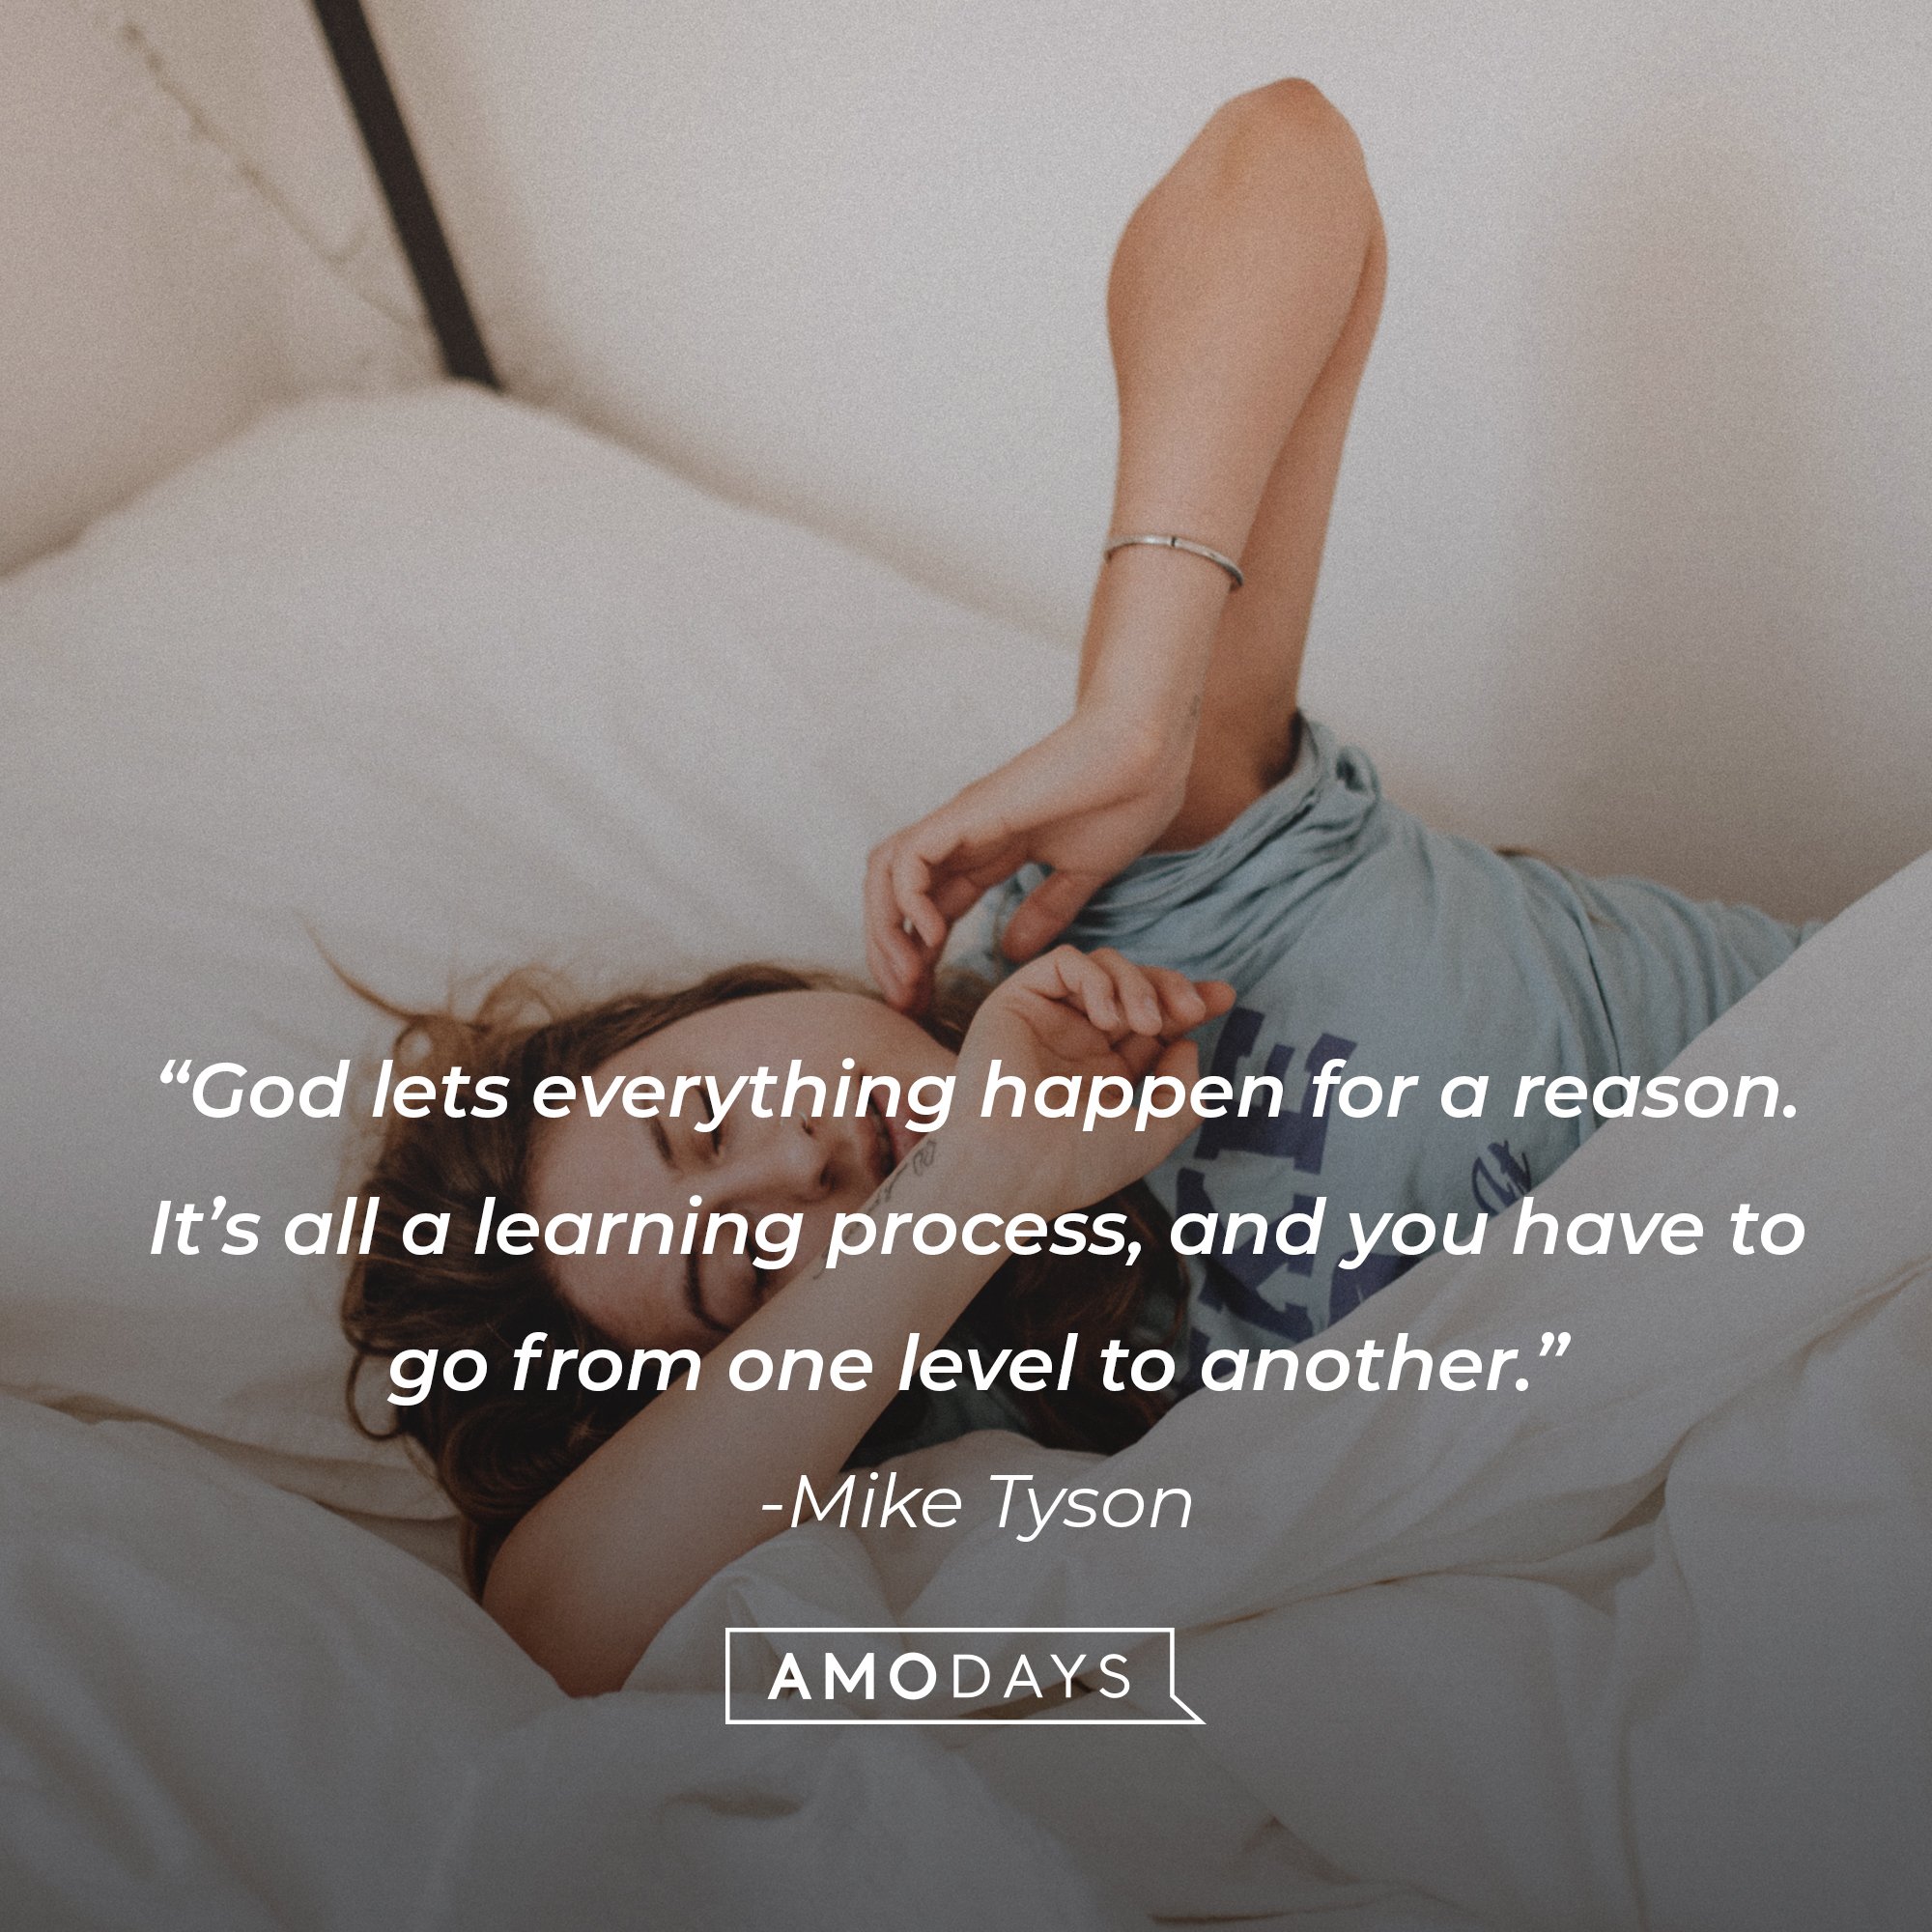 Mike Tyson's quote: “God lets everything happen for a reason. It’s all a learning process, and you have to go from one level to another.” | Image: AmoDays